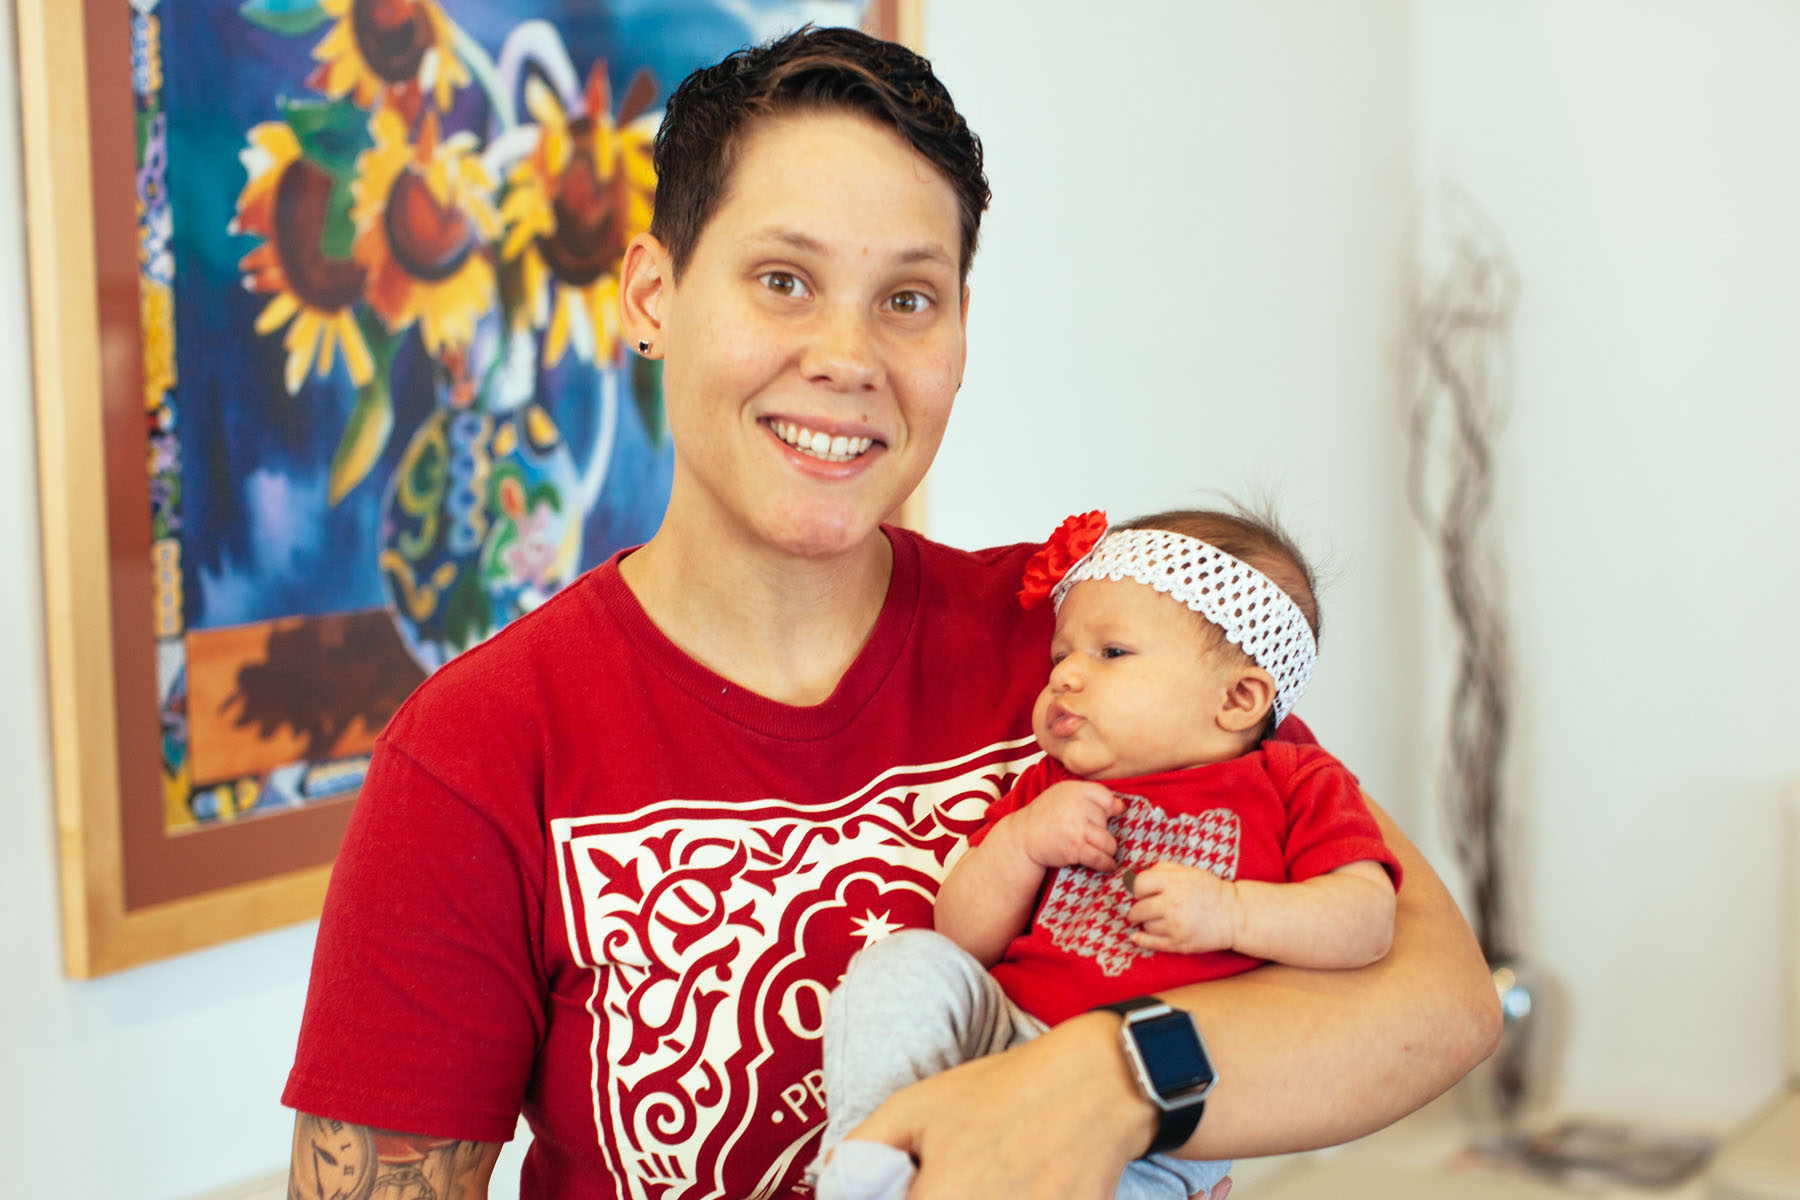 Photograph of a person in a red printed graphic t-shirt with short, clean cut hair, smiling, holding a baby who looks around 3 months old wearing a matching red onesie and floral headband. In the background is a painting of sunflowers in a gold frame.